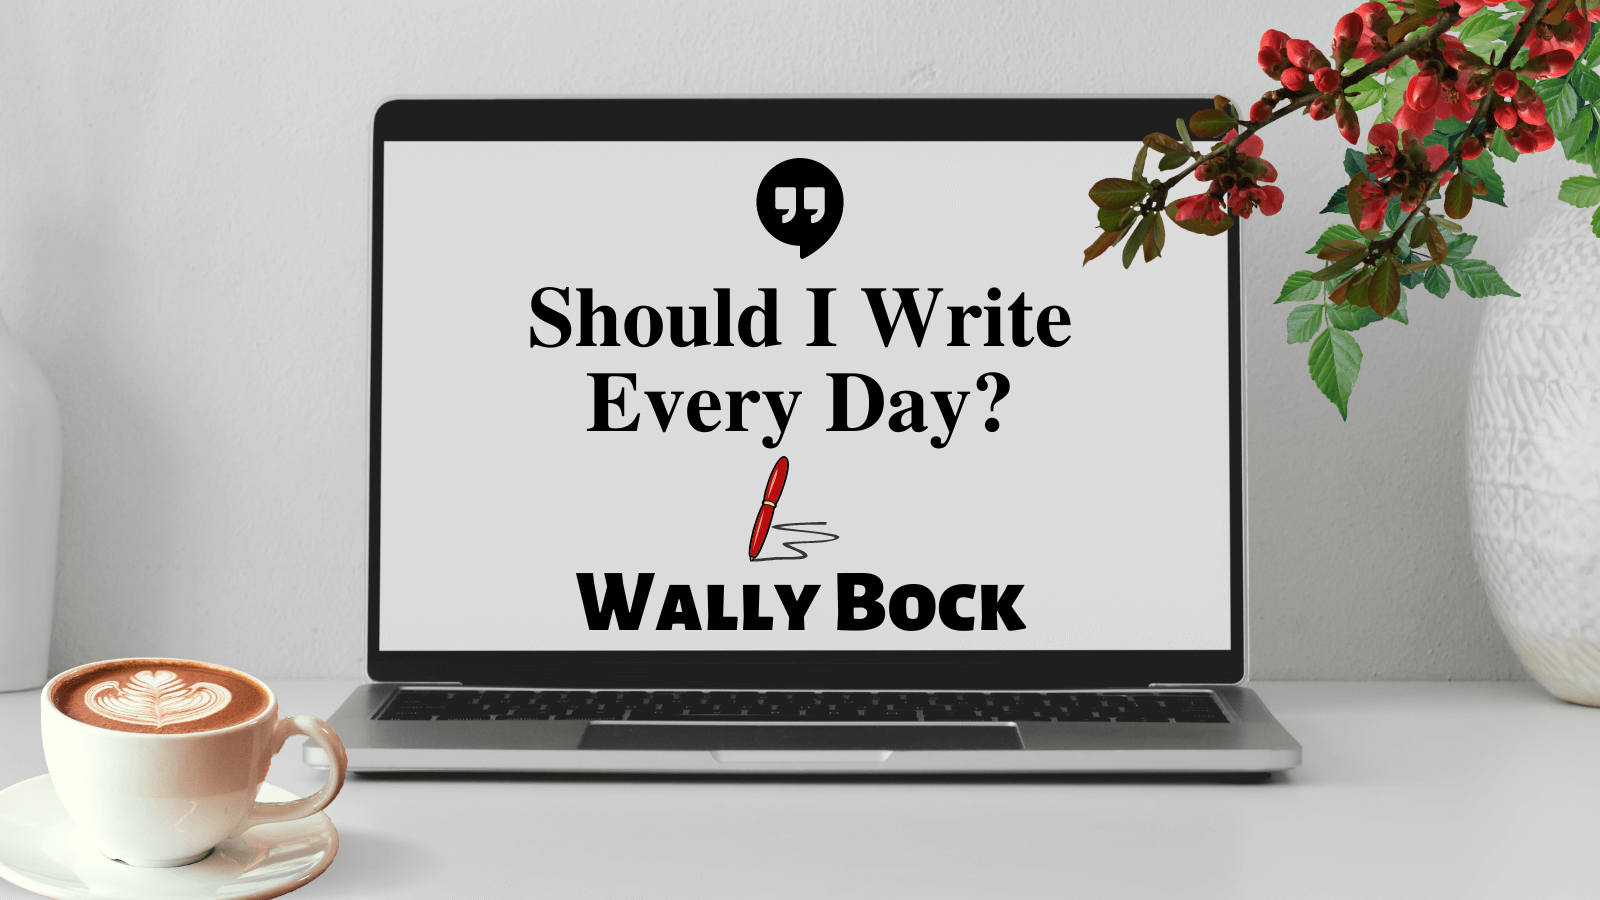 Should I write every day?